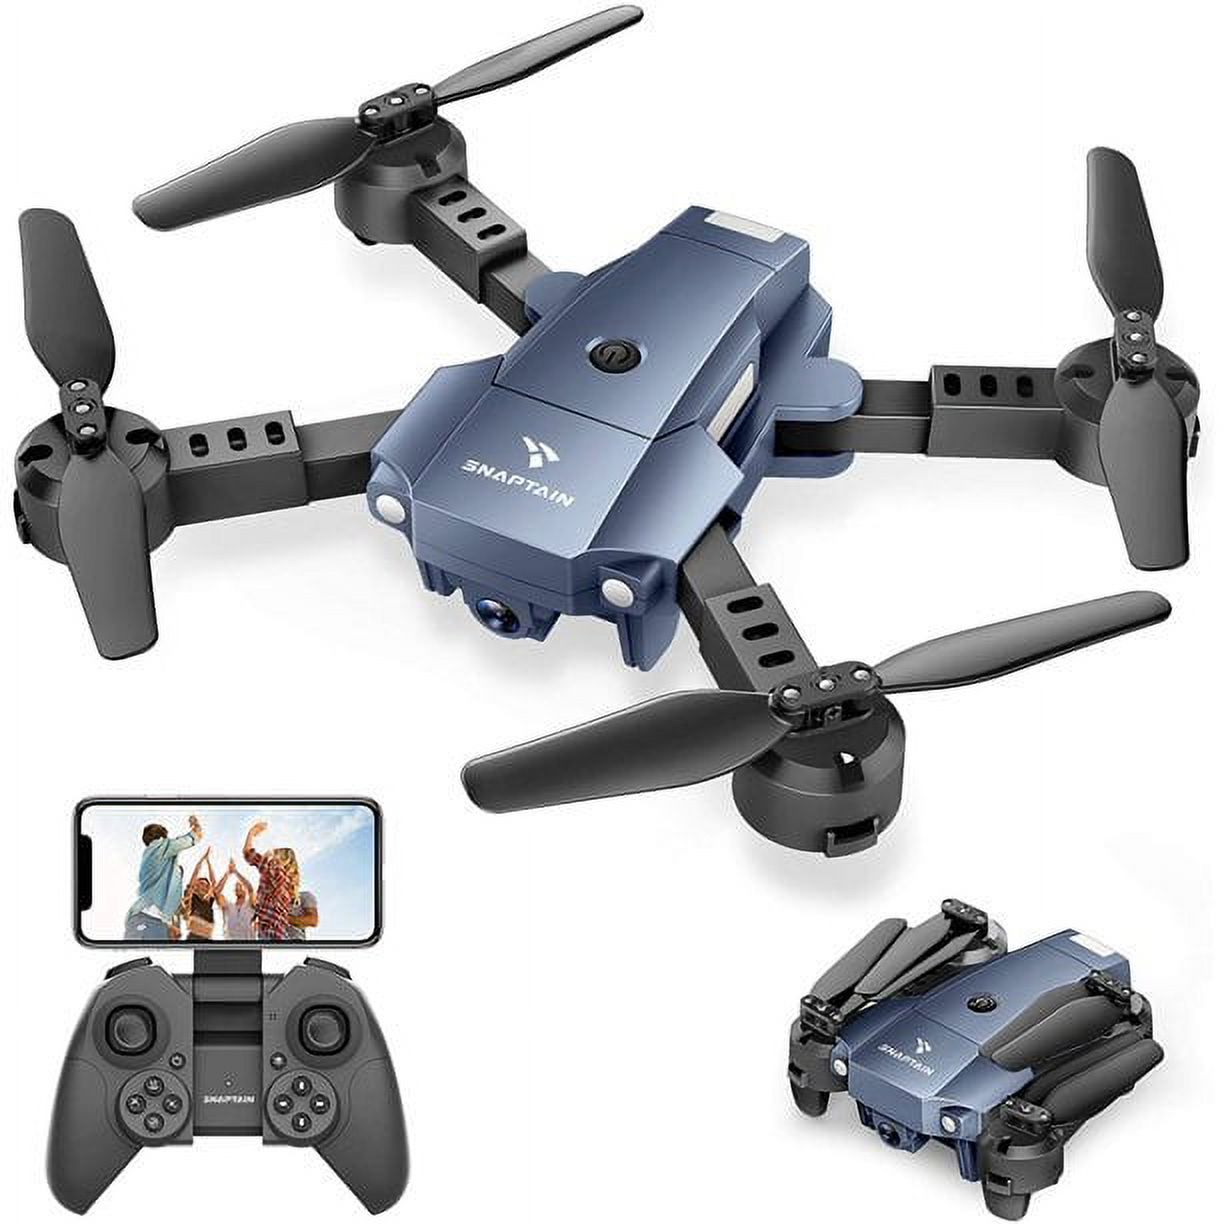 Snaptain A10 Mini Foldable Drone with 1080P HD Camera FPV WiFi RC Quadcopter with Voice/Gesture Control Trajectory Flight Circle Fly High-Speed Rotation 3D Flips G-Sensor Headless Mode Blue - image 3 of 3